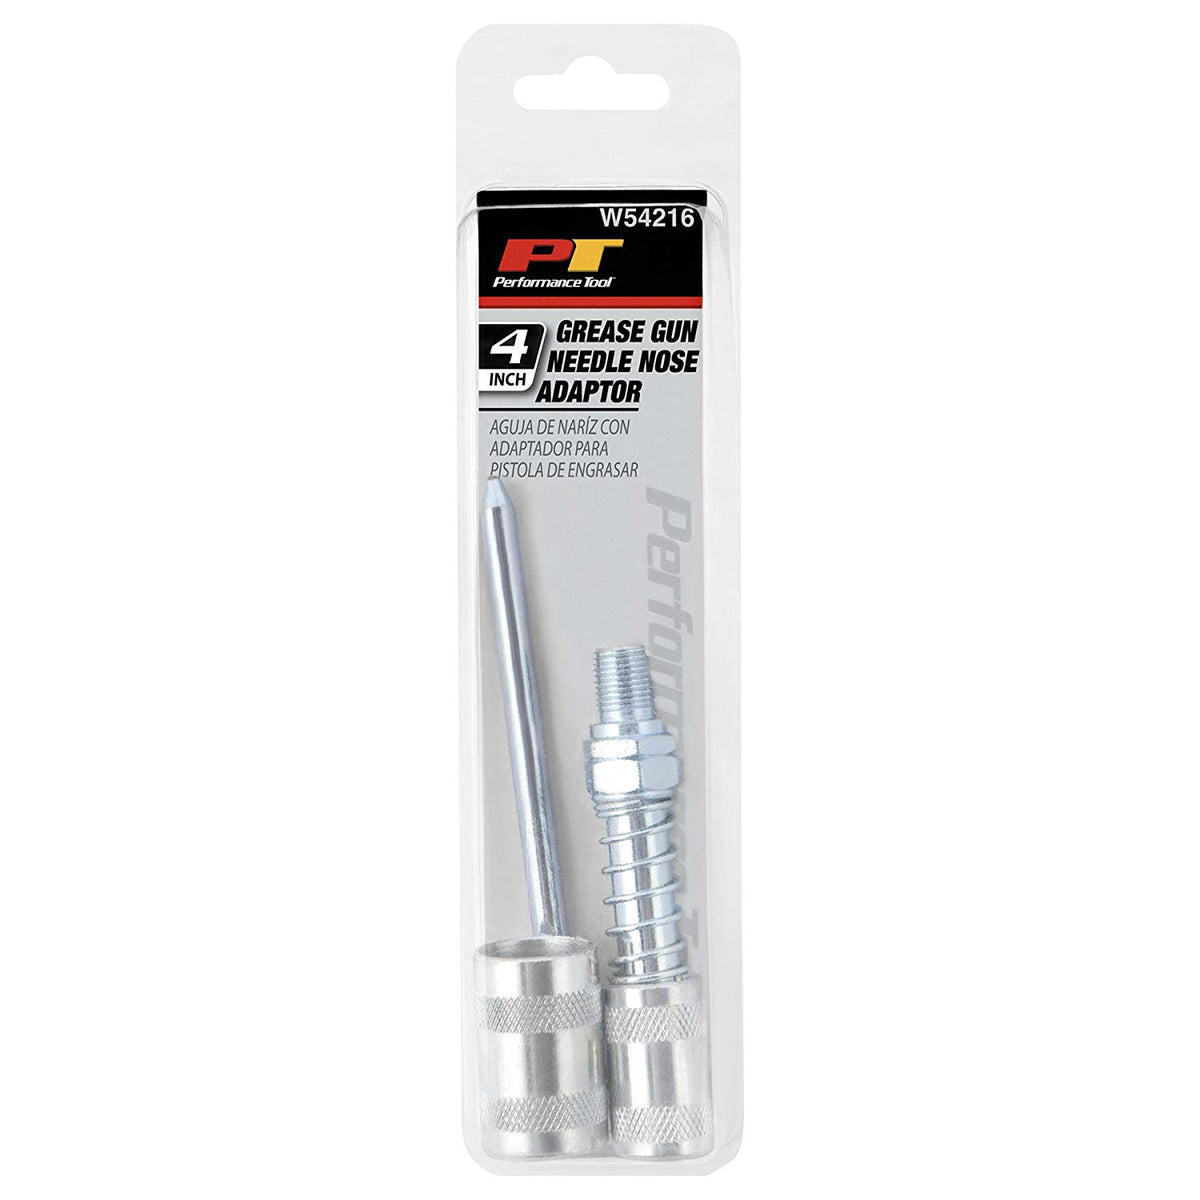 Performance Tool W54216 Grease Gun Needle Nose Adapter, 4"